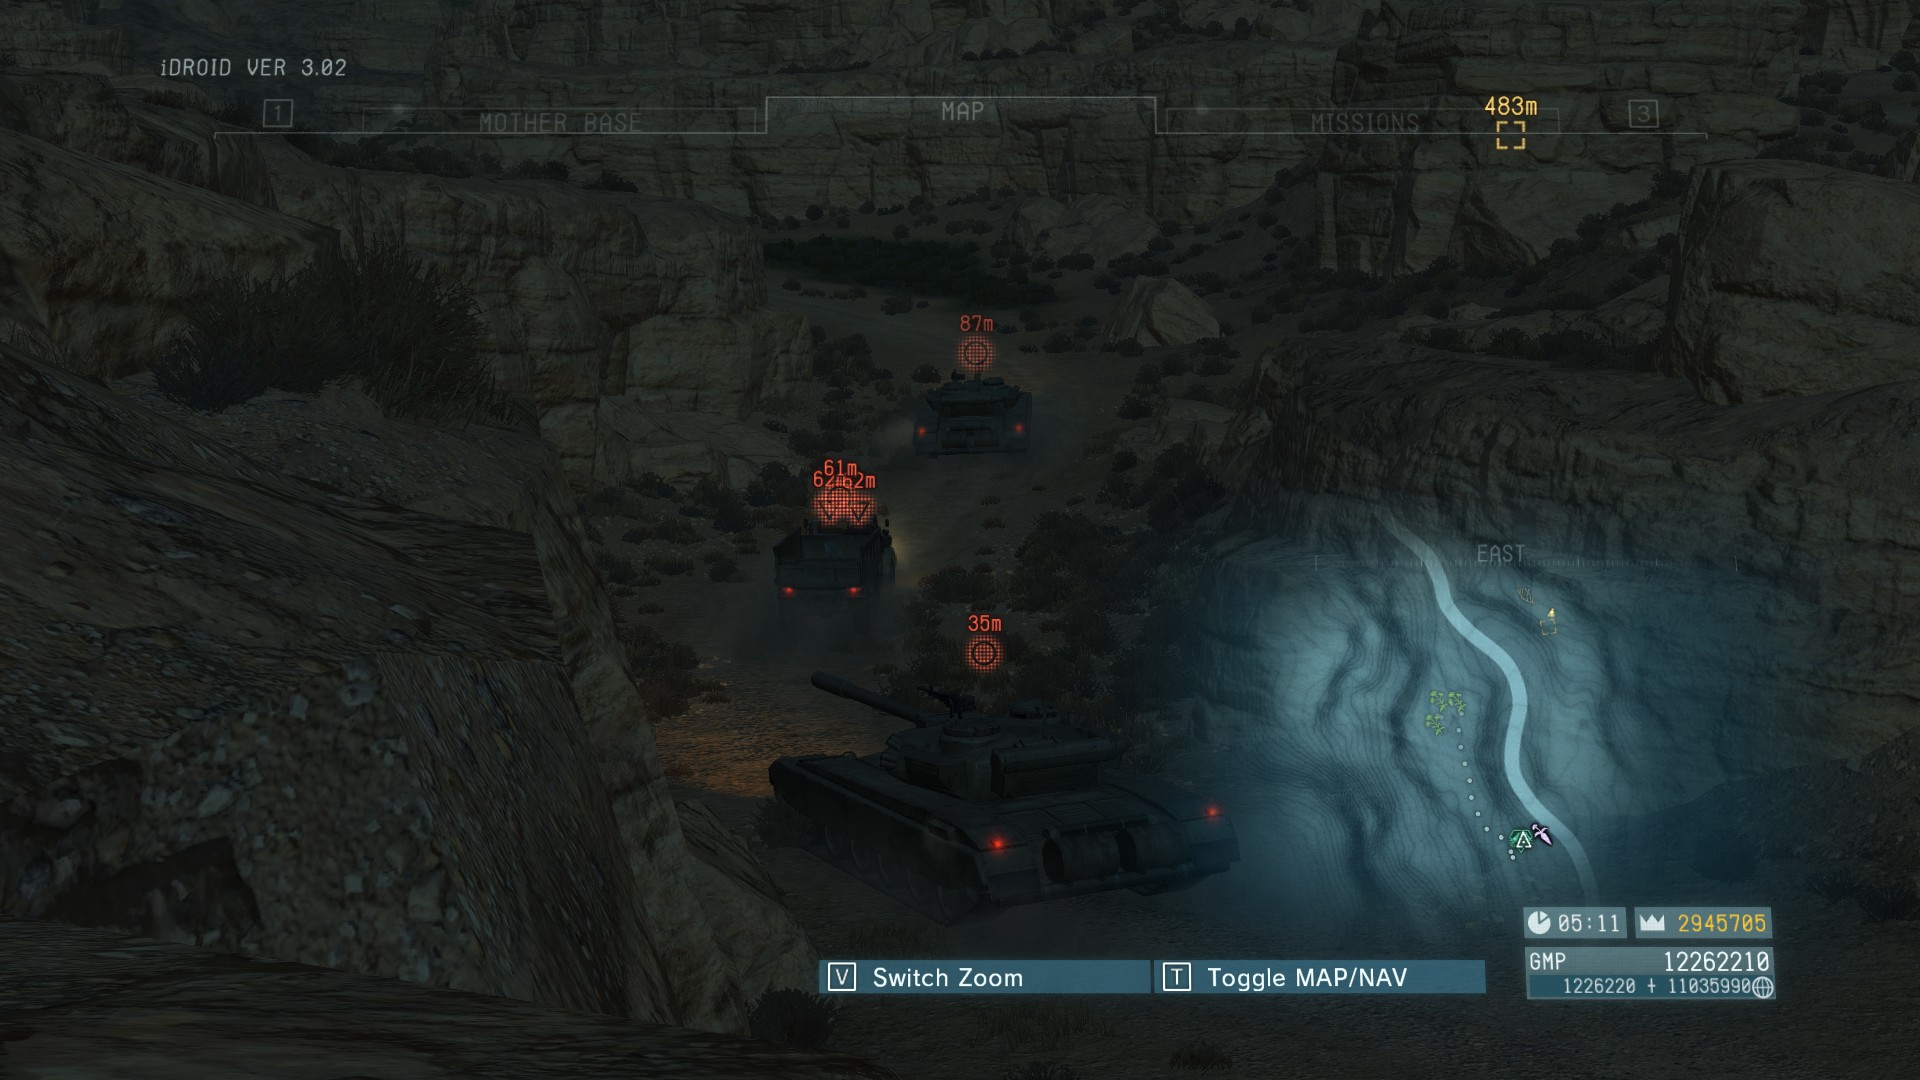 METAL GEAR SOLID V: THE PHANTOM PAIN - All Vehicles and Missions Guide - Occupation Forces - 258B4CA